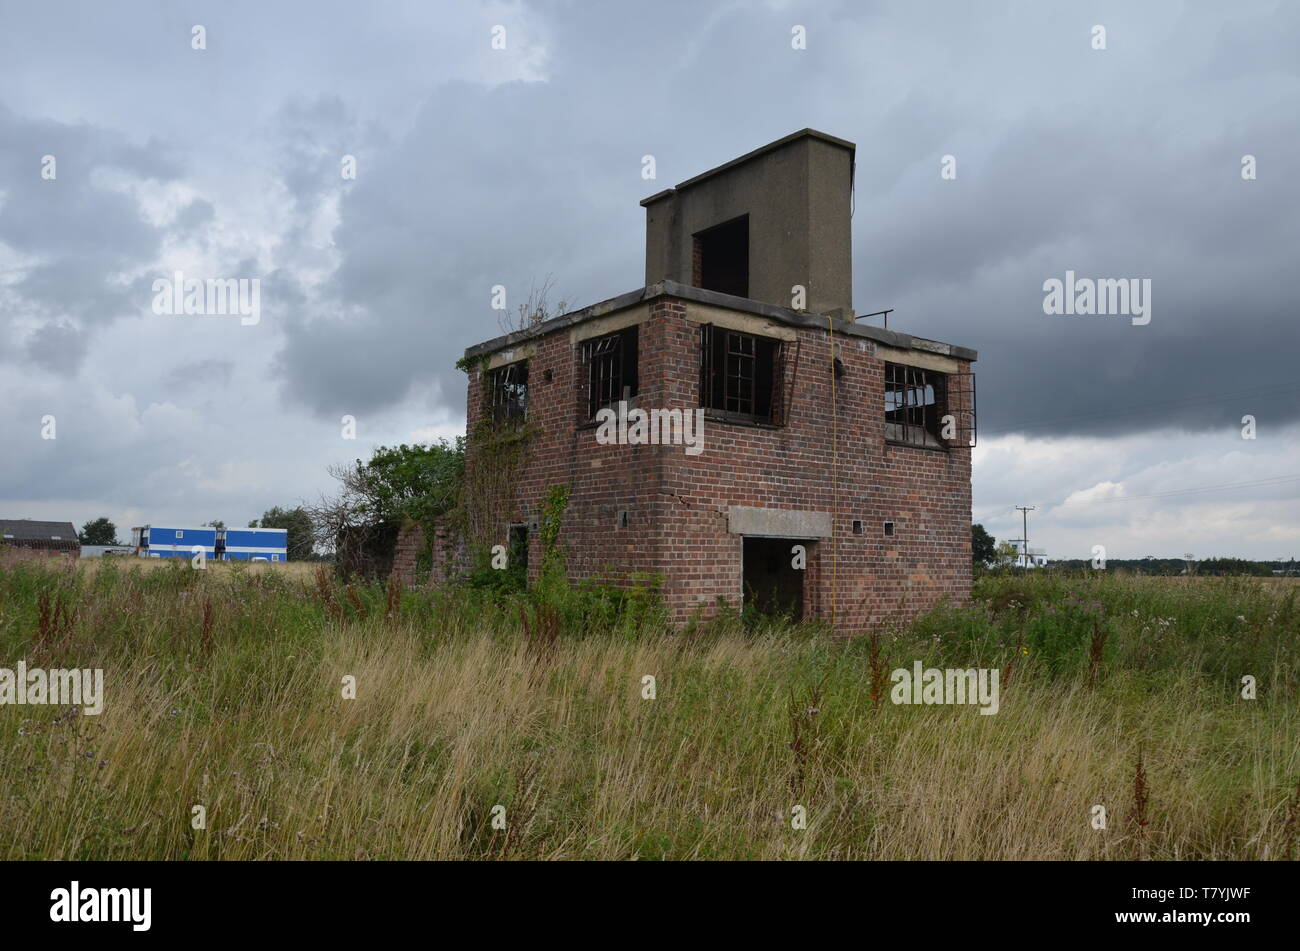 RAF Tholthorpe control tower, ww2 military architecture Stock Photo